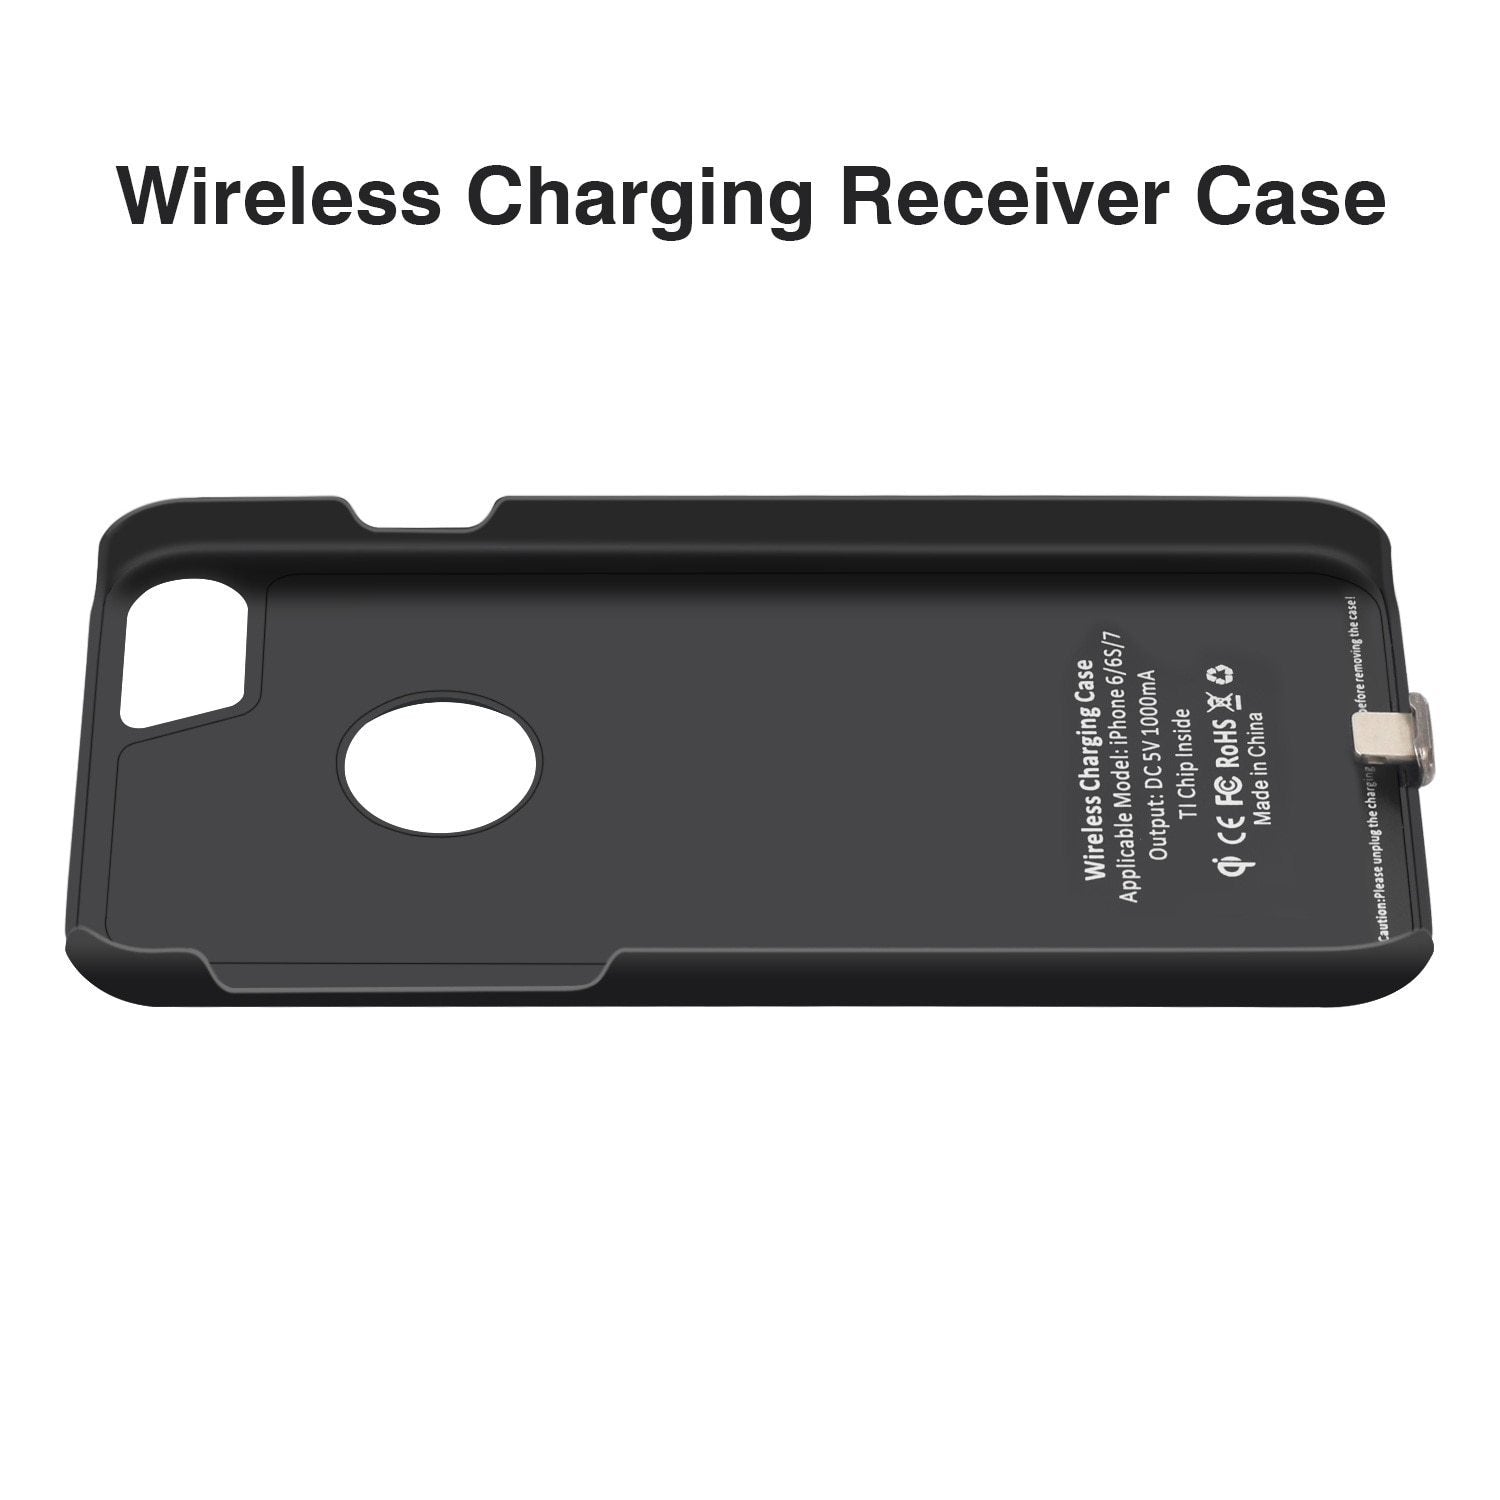 Qi Wireless Charger Receiver Case For Iphone 7 6 6S Mobile Phone Case Wireless Charging Transmitter Cover For Iphone 7 Plus 6 6S